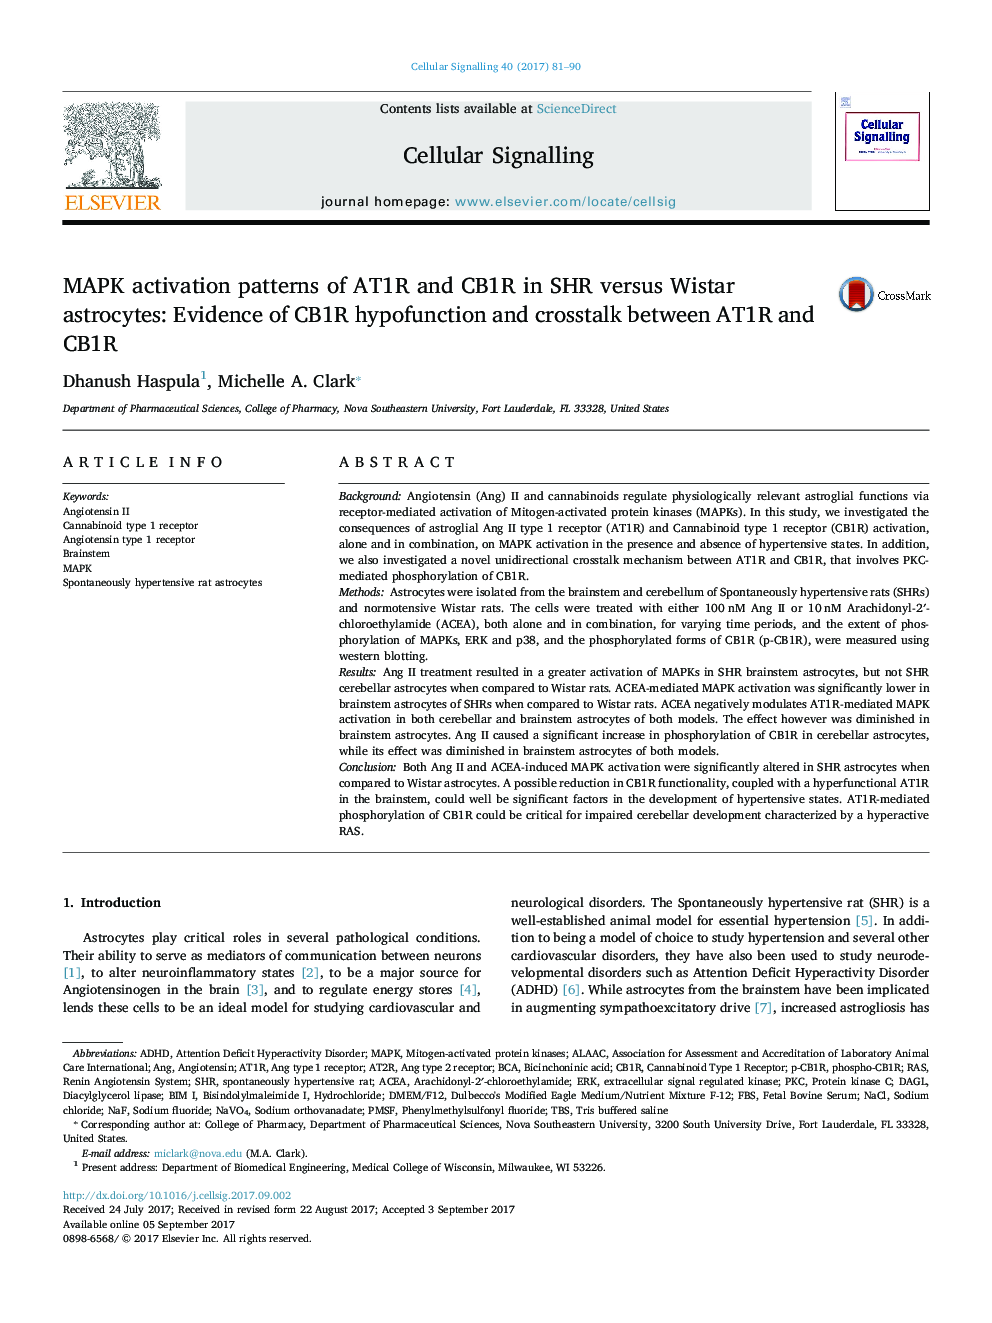 MAPK activation patterns of AT1R and CB1R in SHR versus Wistar astrocytes: Evidence of CB1R hypofunction and crosstalk between AT1R and CB1R